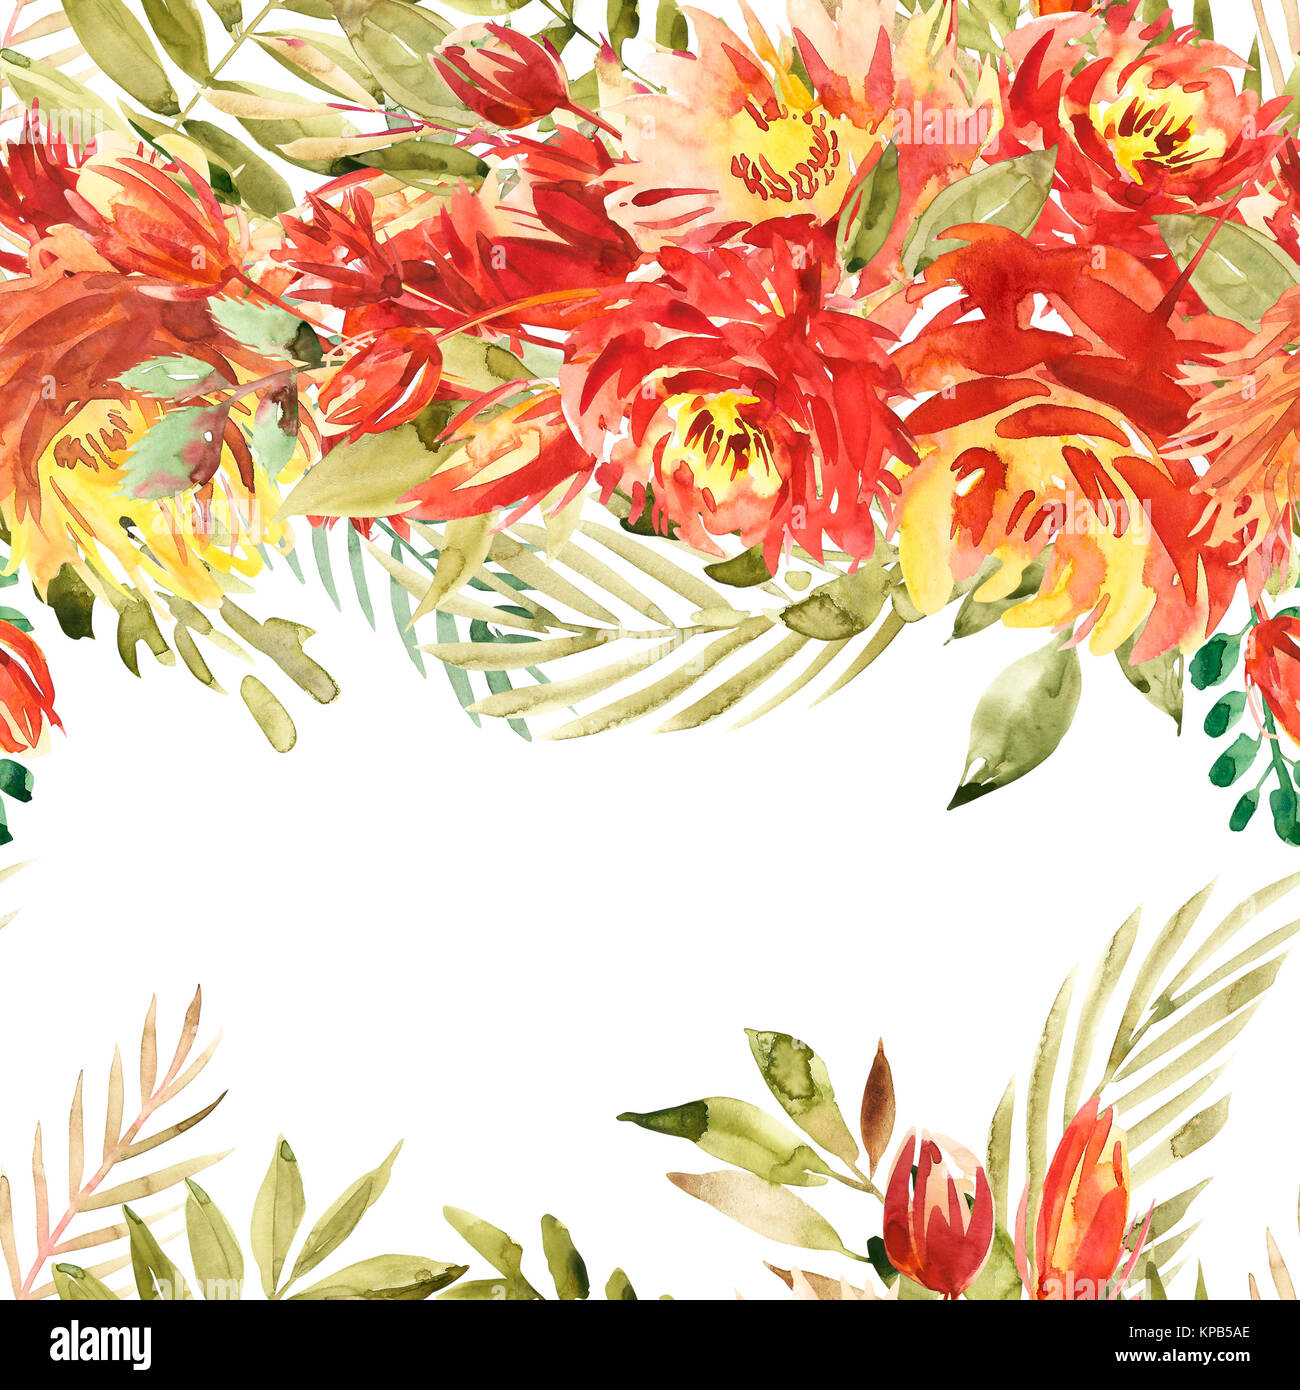 Wallpaper Border Bright Wildflowers Floral Squares